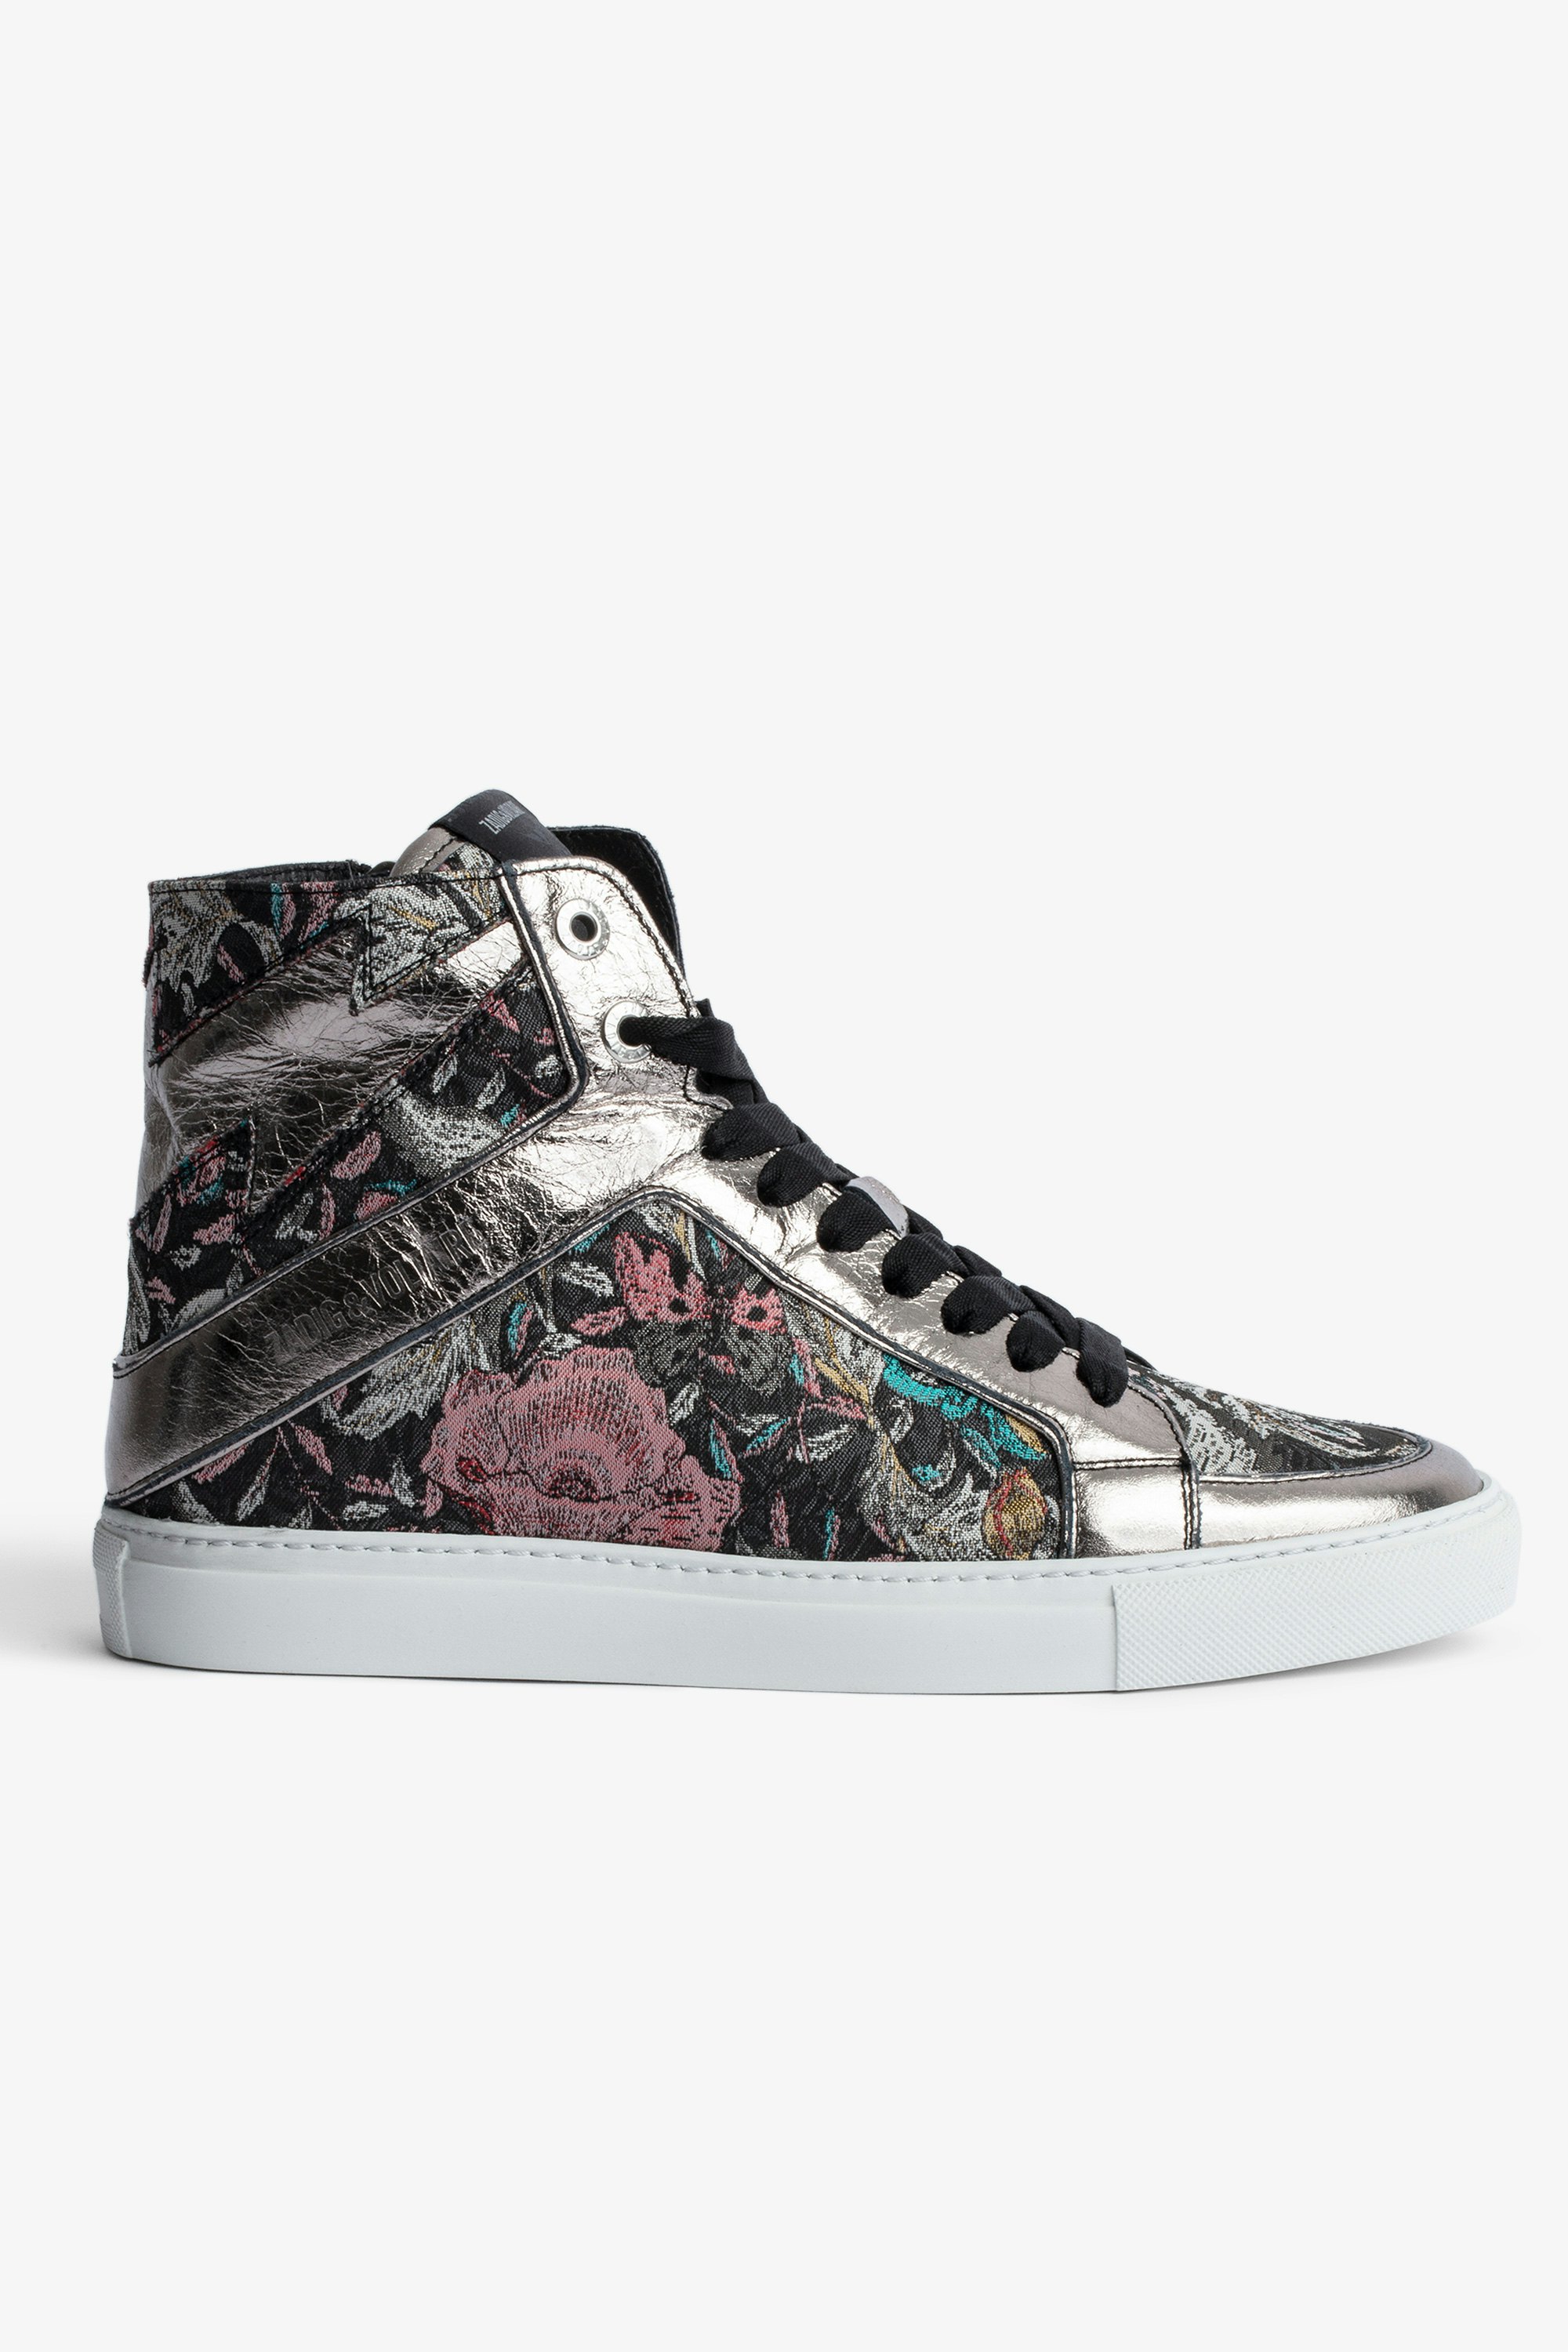 ZV1747 High Flash スニーカー Women’s black leather and floral-print jacquard sneakers with metallic panels